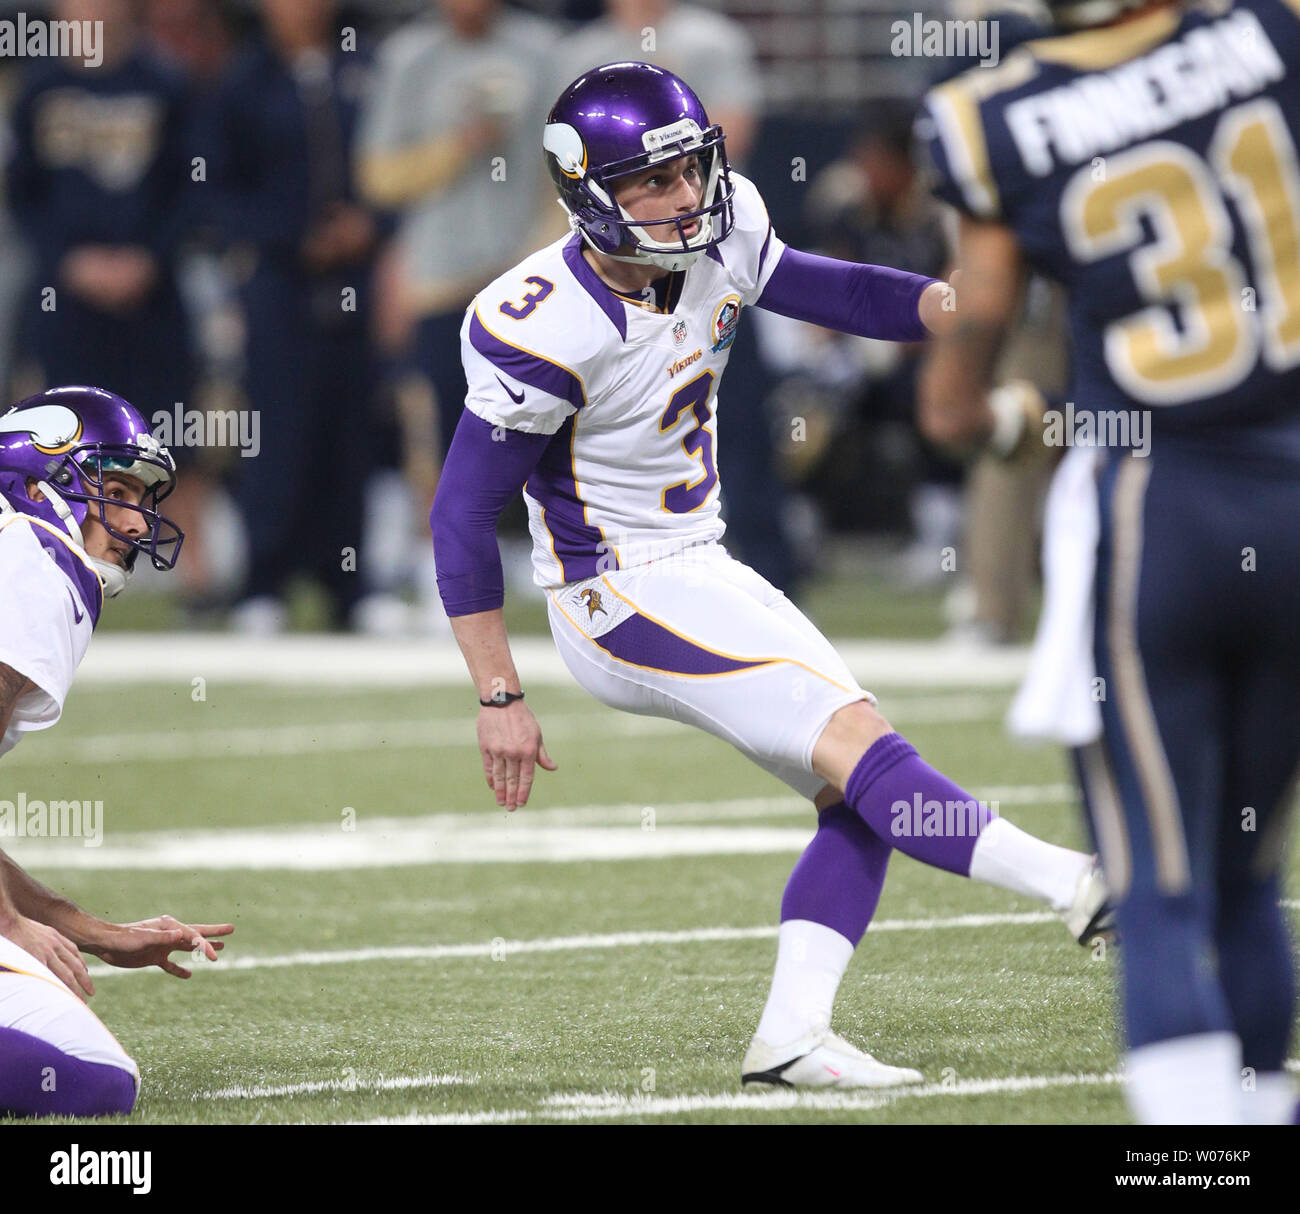 Minnesota Vikings kicker Blair Walsh kicks a 51- yard field goal in the fourth quarter against the St. Louis Rams at the Edward Jones Dome in St. Louis on December 16, 2012. Walsh had five field goals in the game, three from 50 or more yards in the 36-22 win over St. Louis.   UPI/Bill Greenblatt Stock Photo